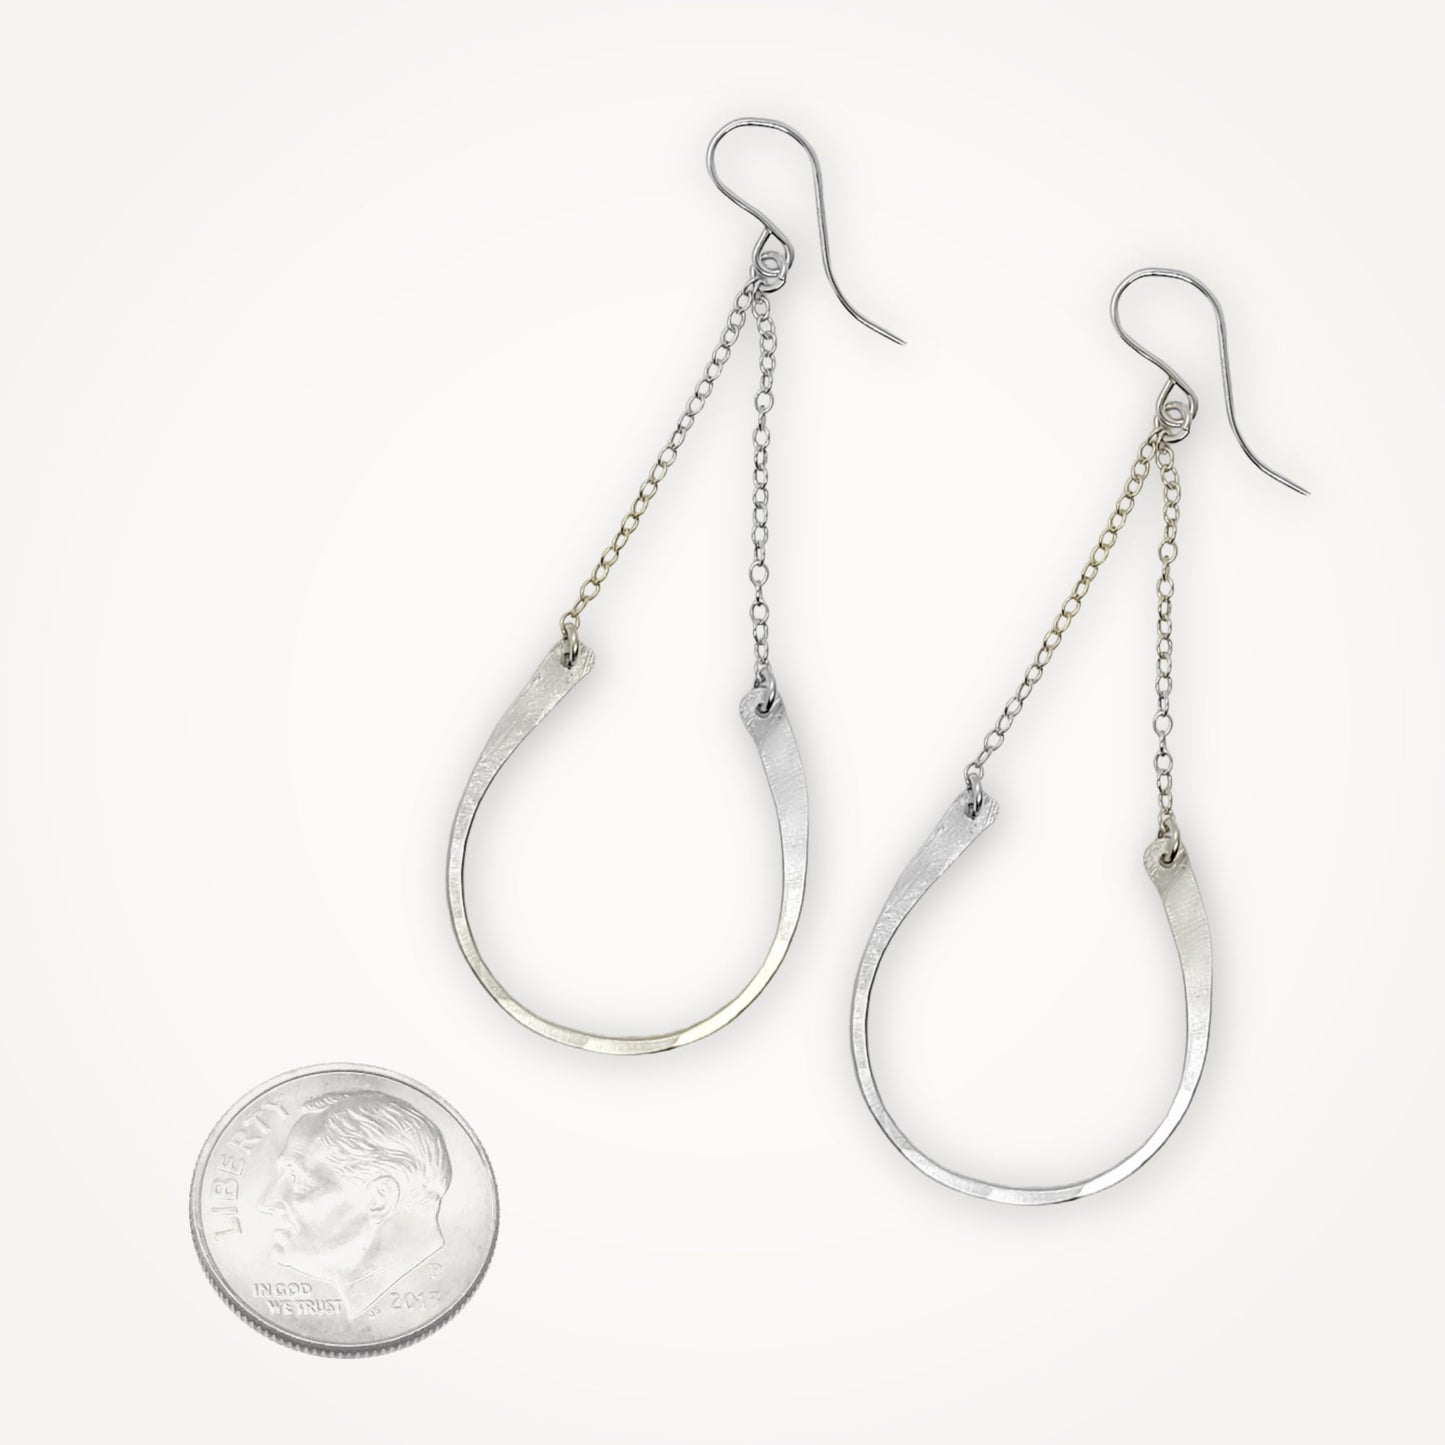 Lucky Horseshoe Earrings in Sterling Silver or Gold Dipped